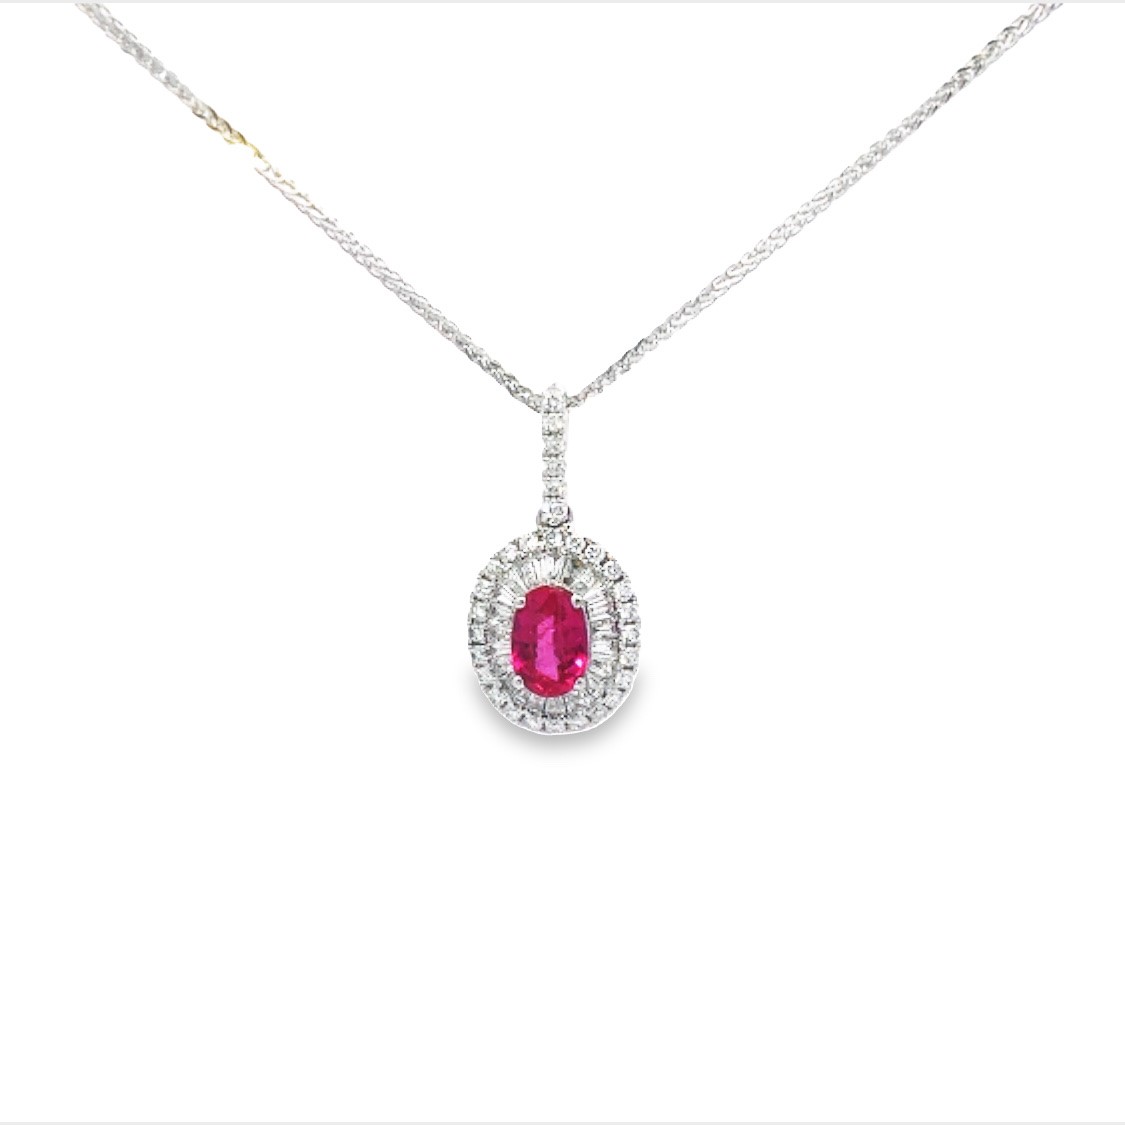 18K White Gold Diamond and Ruby Halo Pendant Necklace